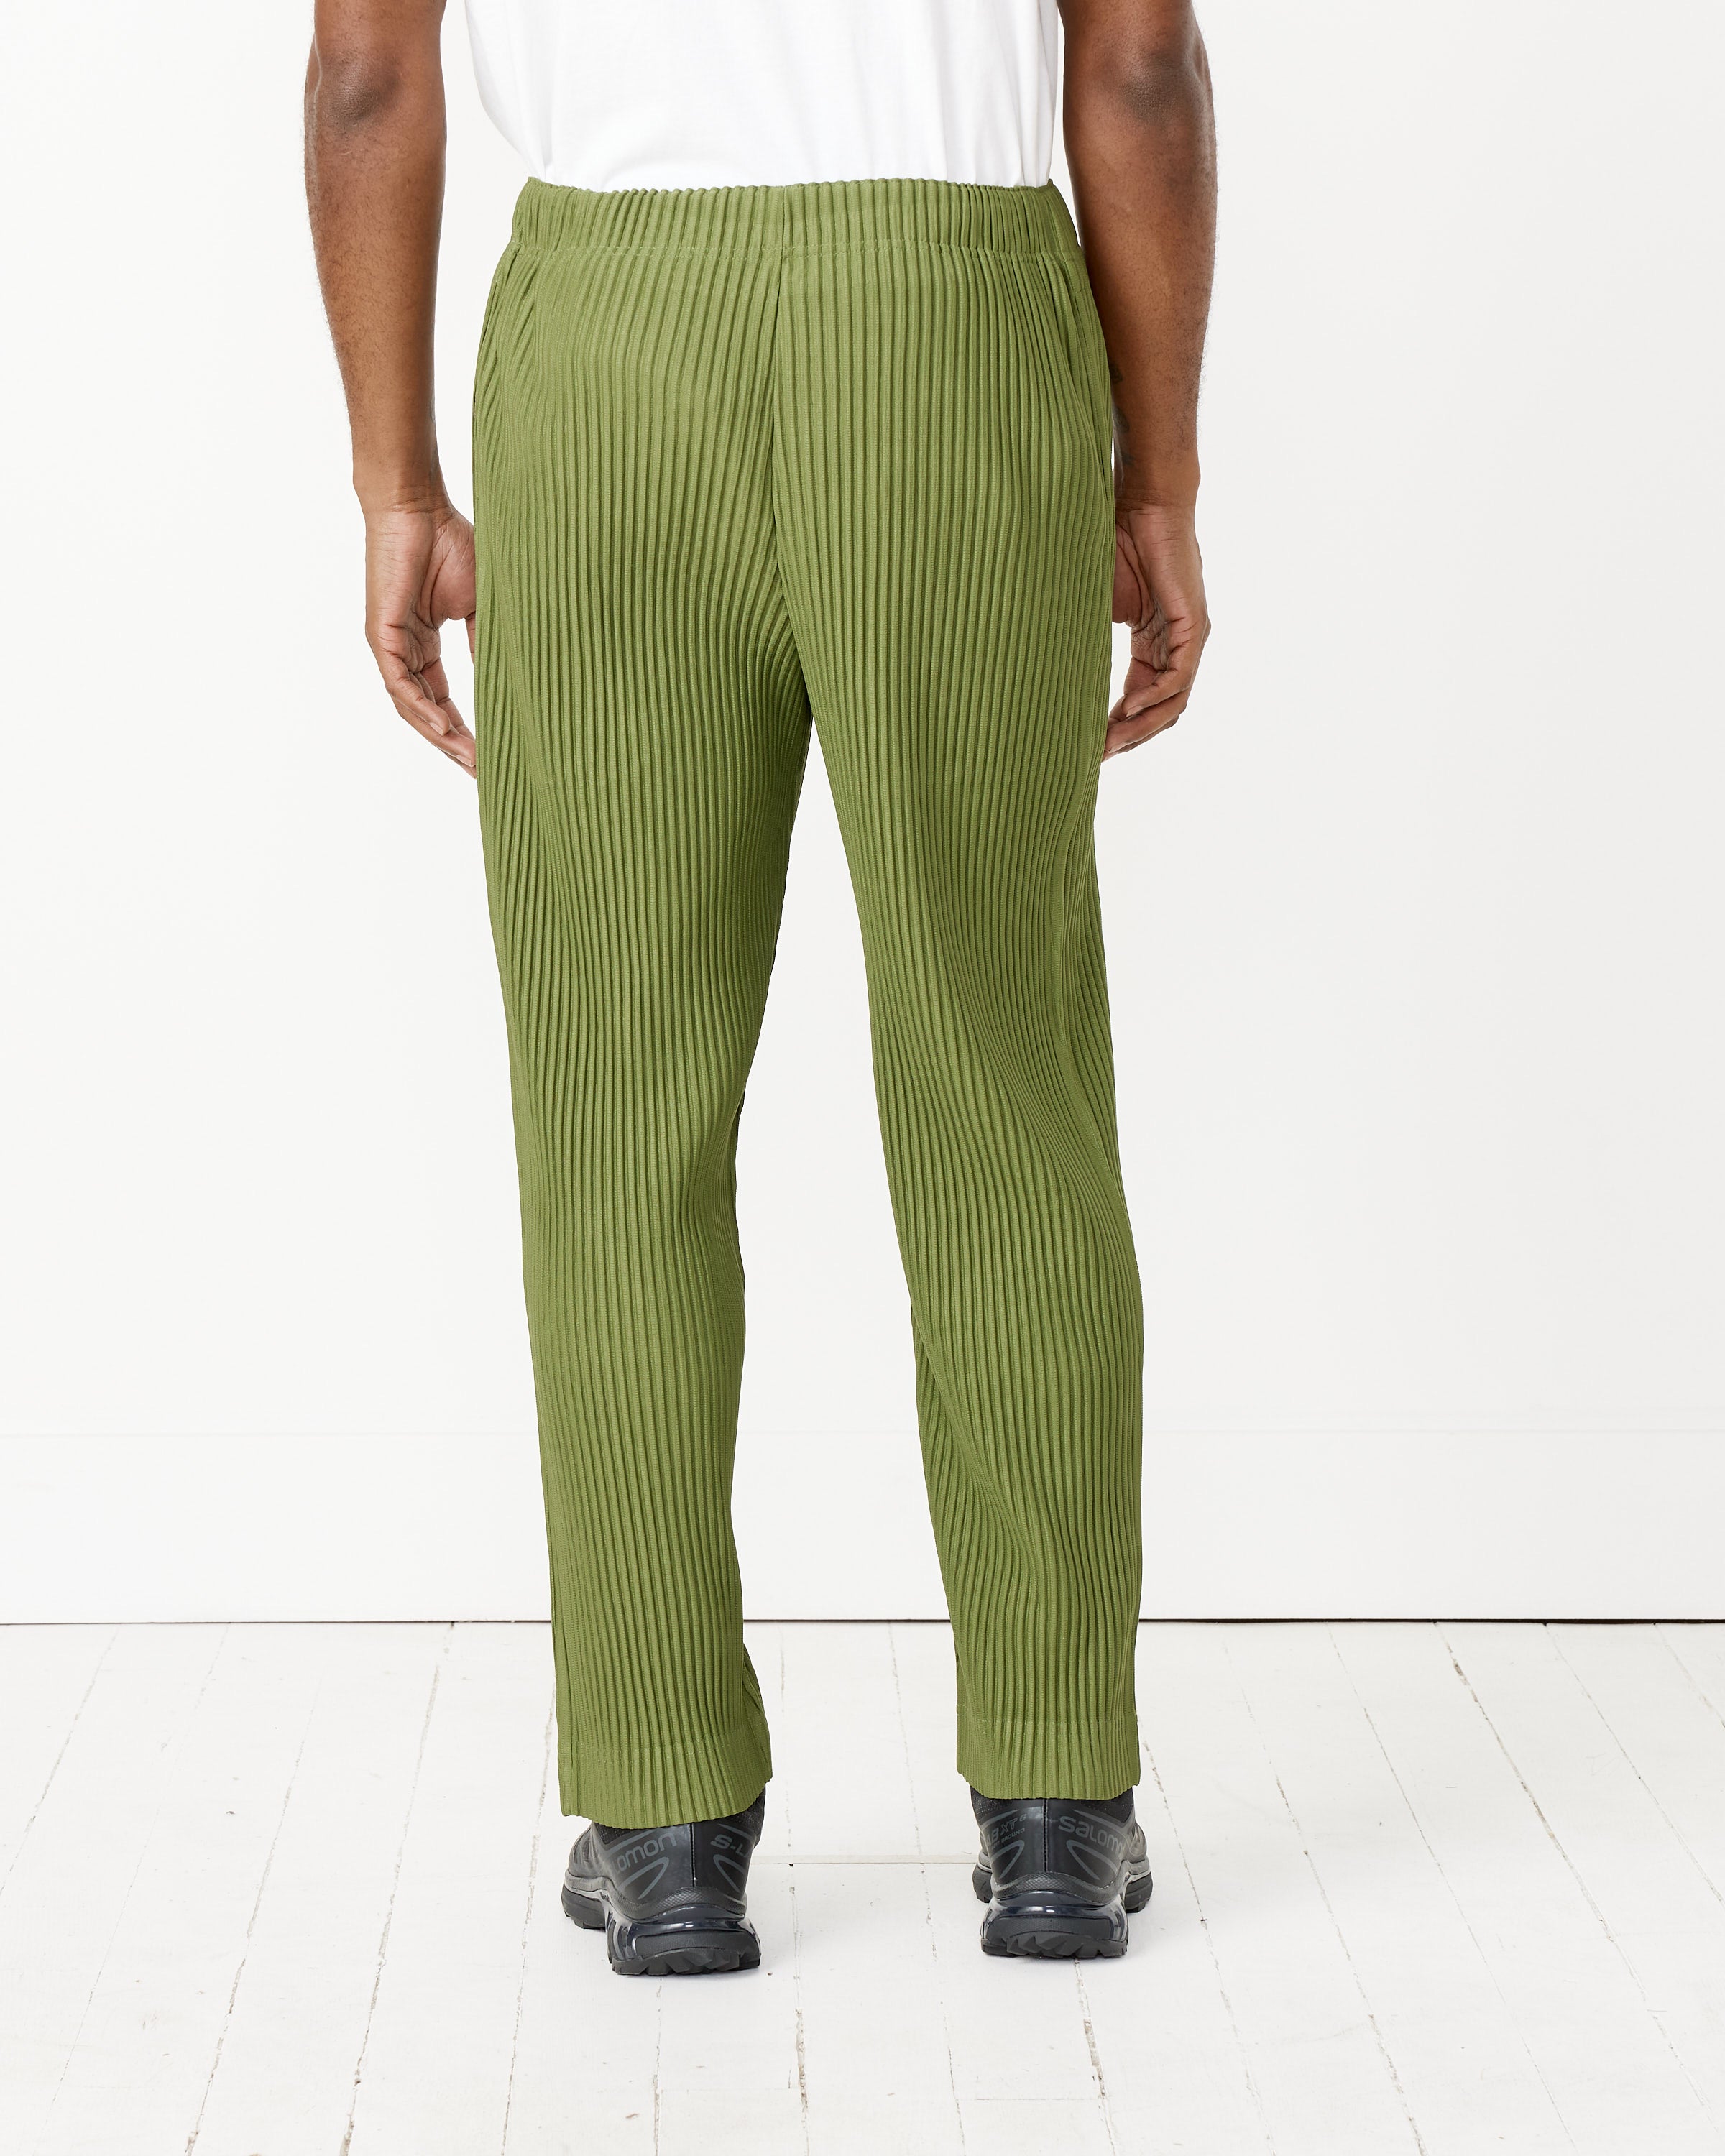 MC Pant in Olive Green